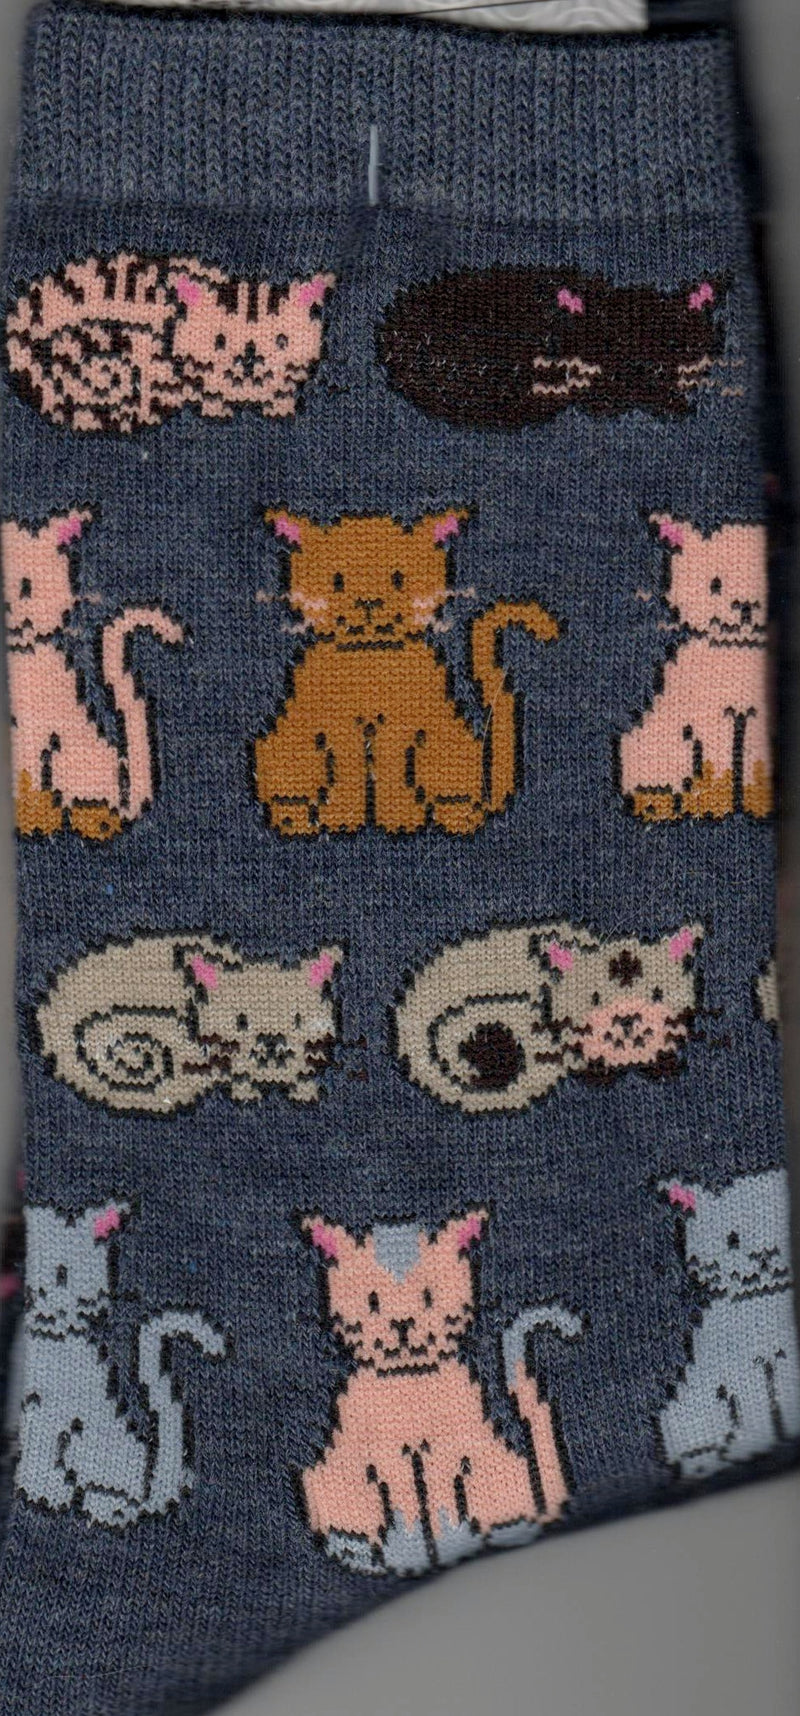 MHS Cats Laying Down and Sitting in size Medium has lots of different colored cats all over this sock either laying down or sitting and all have very pink ears.